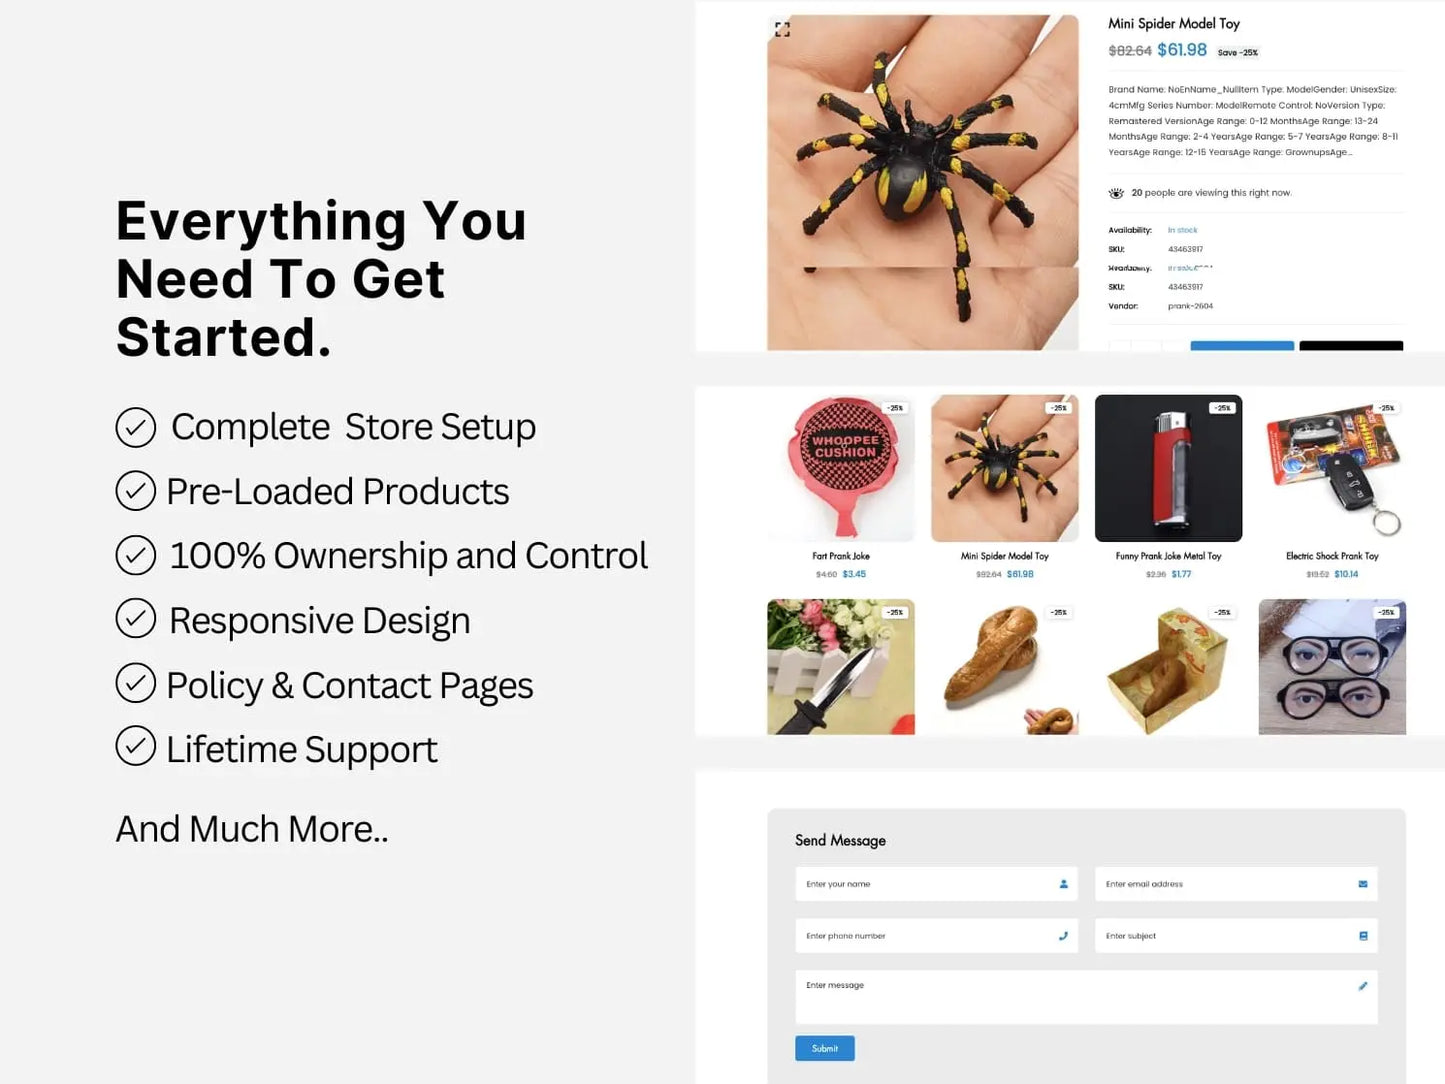 Prank Toys Shopify Starter Dropship Store & Ecommerce Website The Stores Project